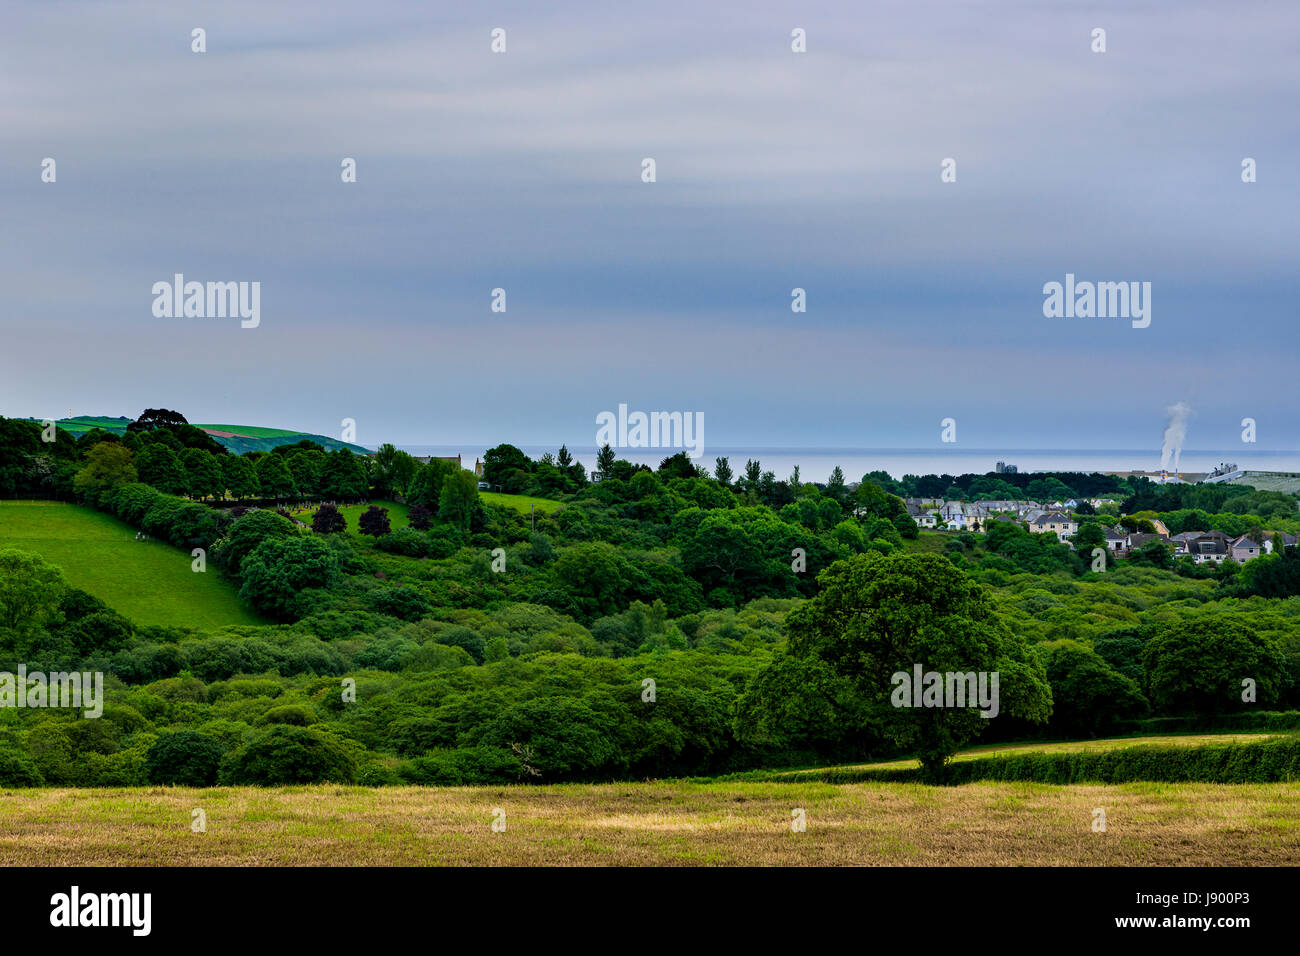 View from St Blazey down into the village of Par. Par is a town built to house the once thousands of emplyees at the local china clay works. Stock Photo